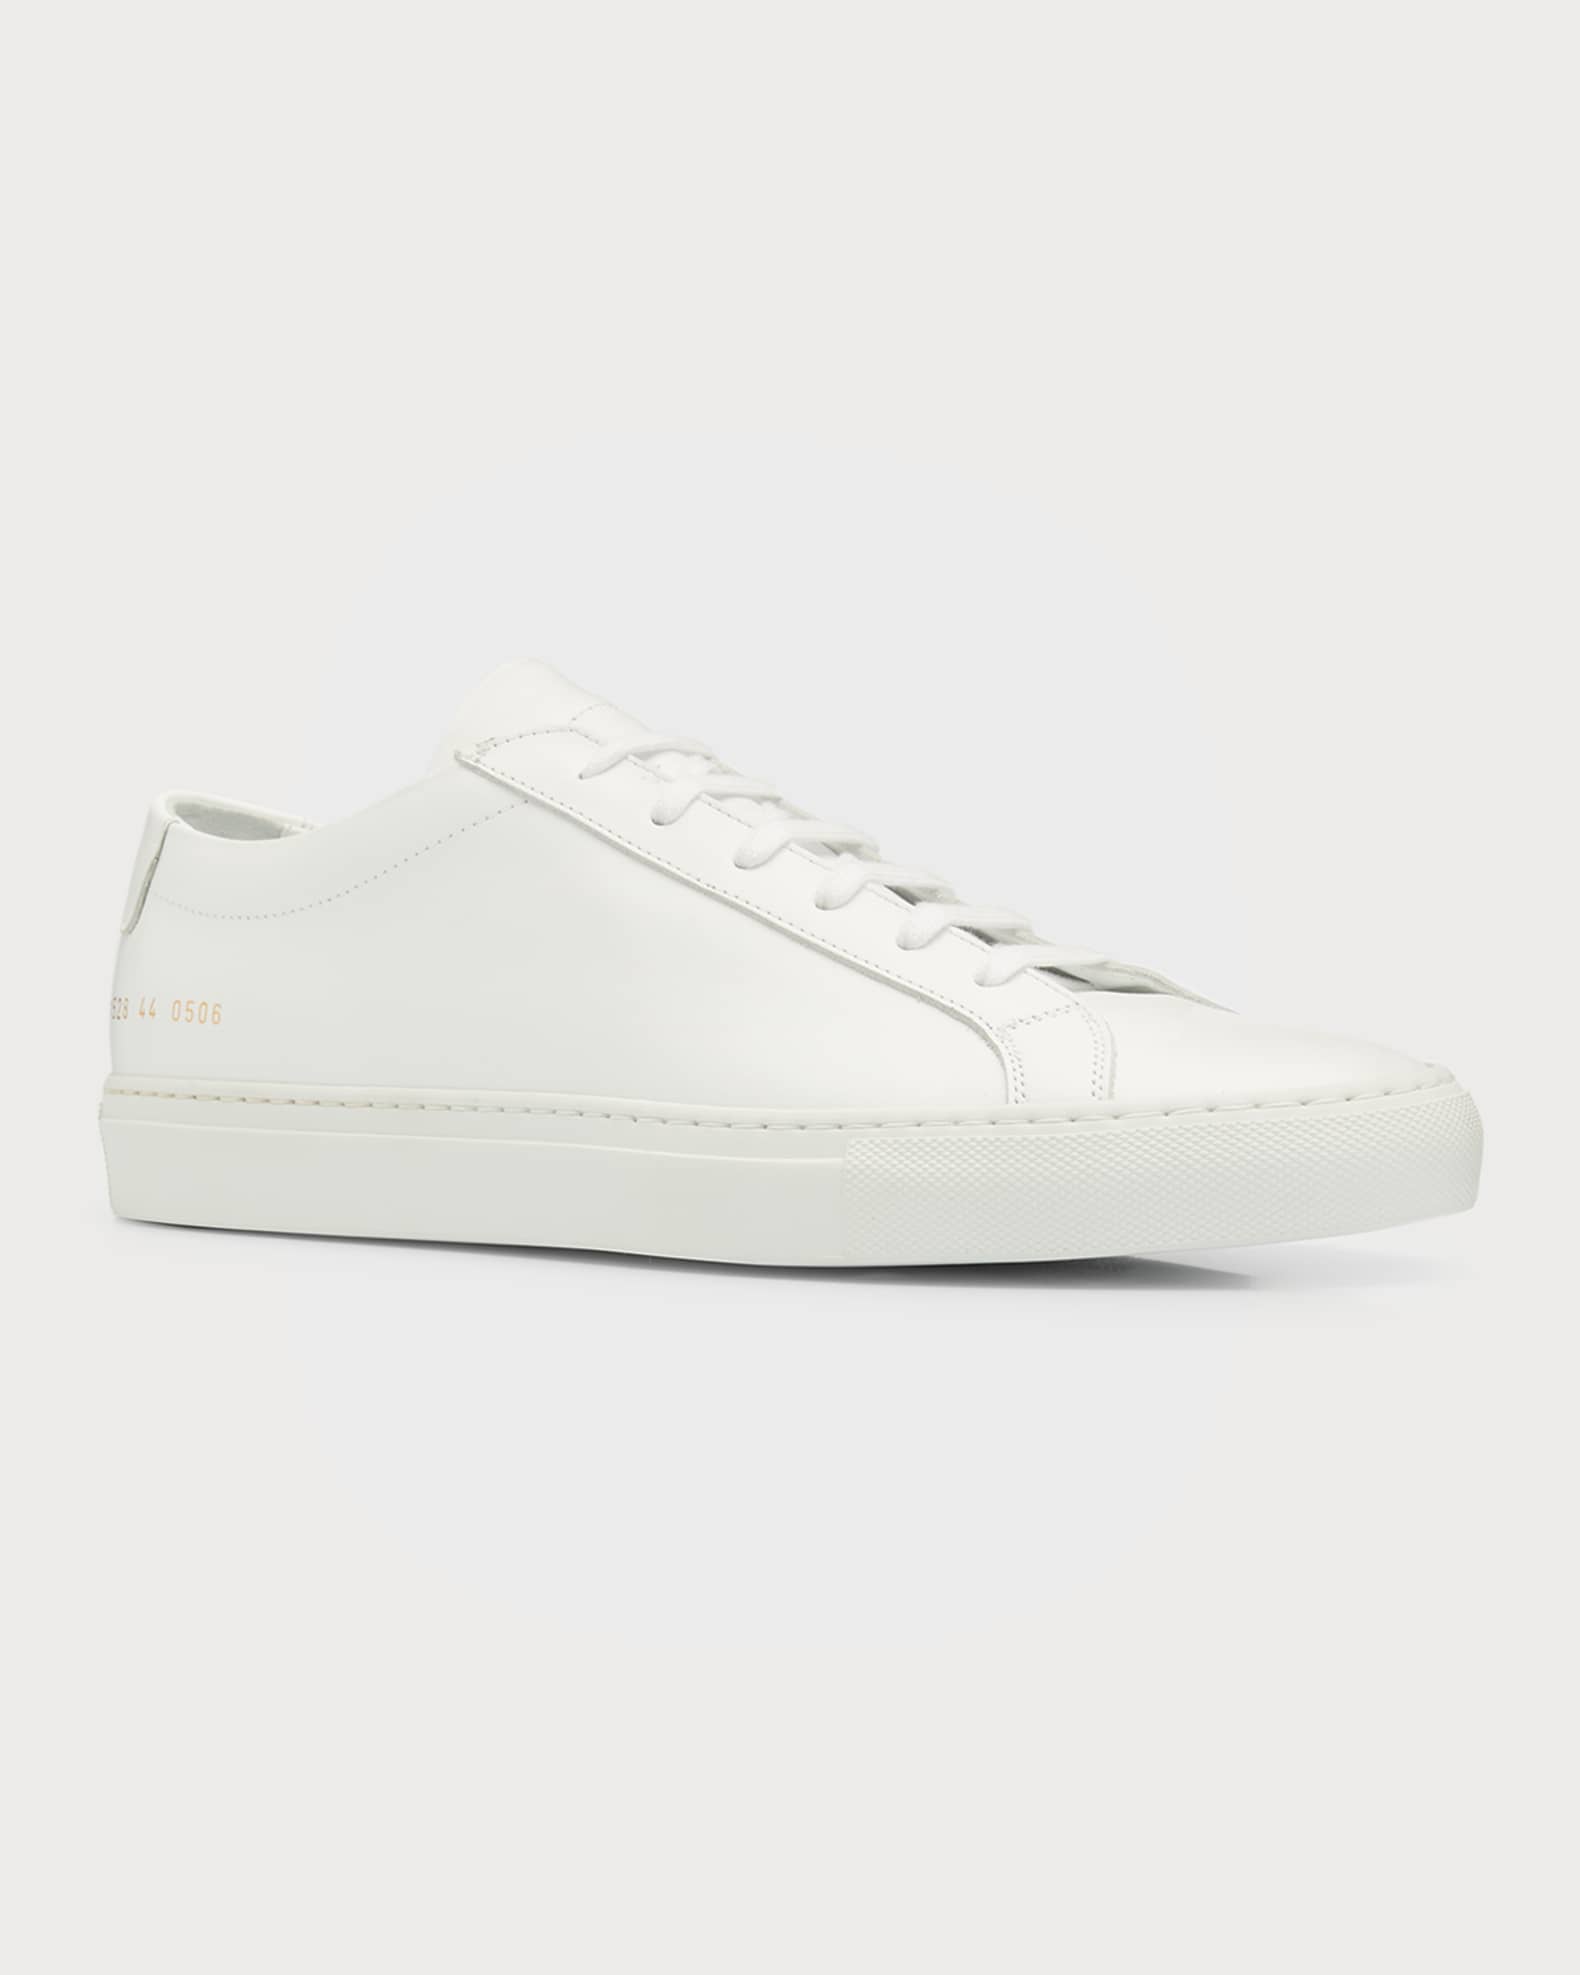 Common Projects Men's Achilles Leather Low-Top Sneakers, White 